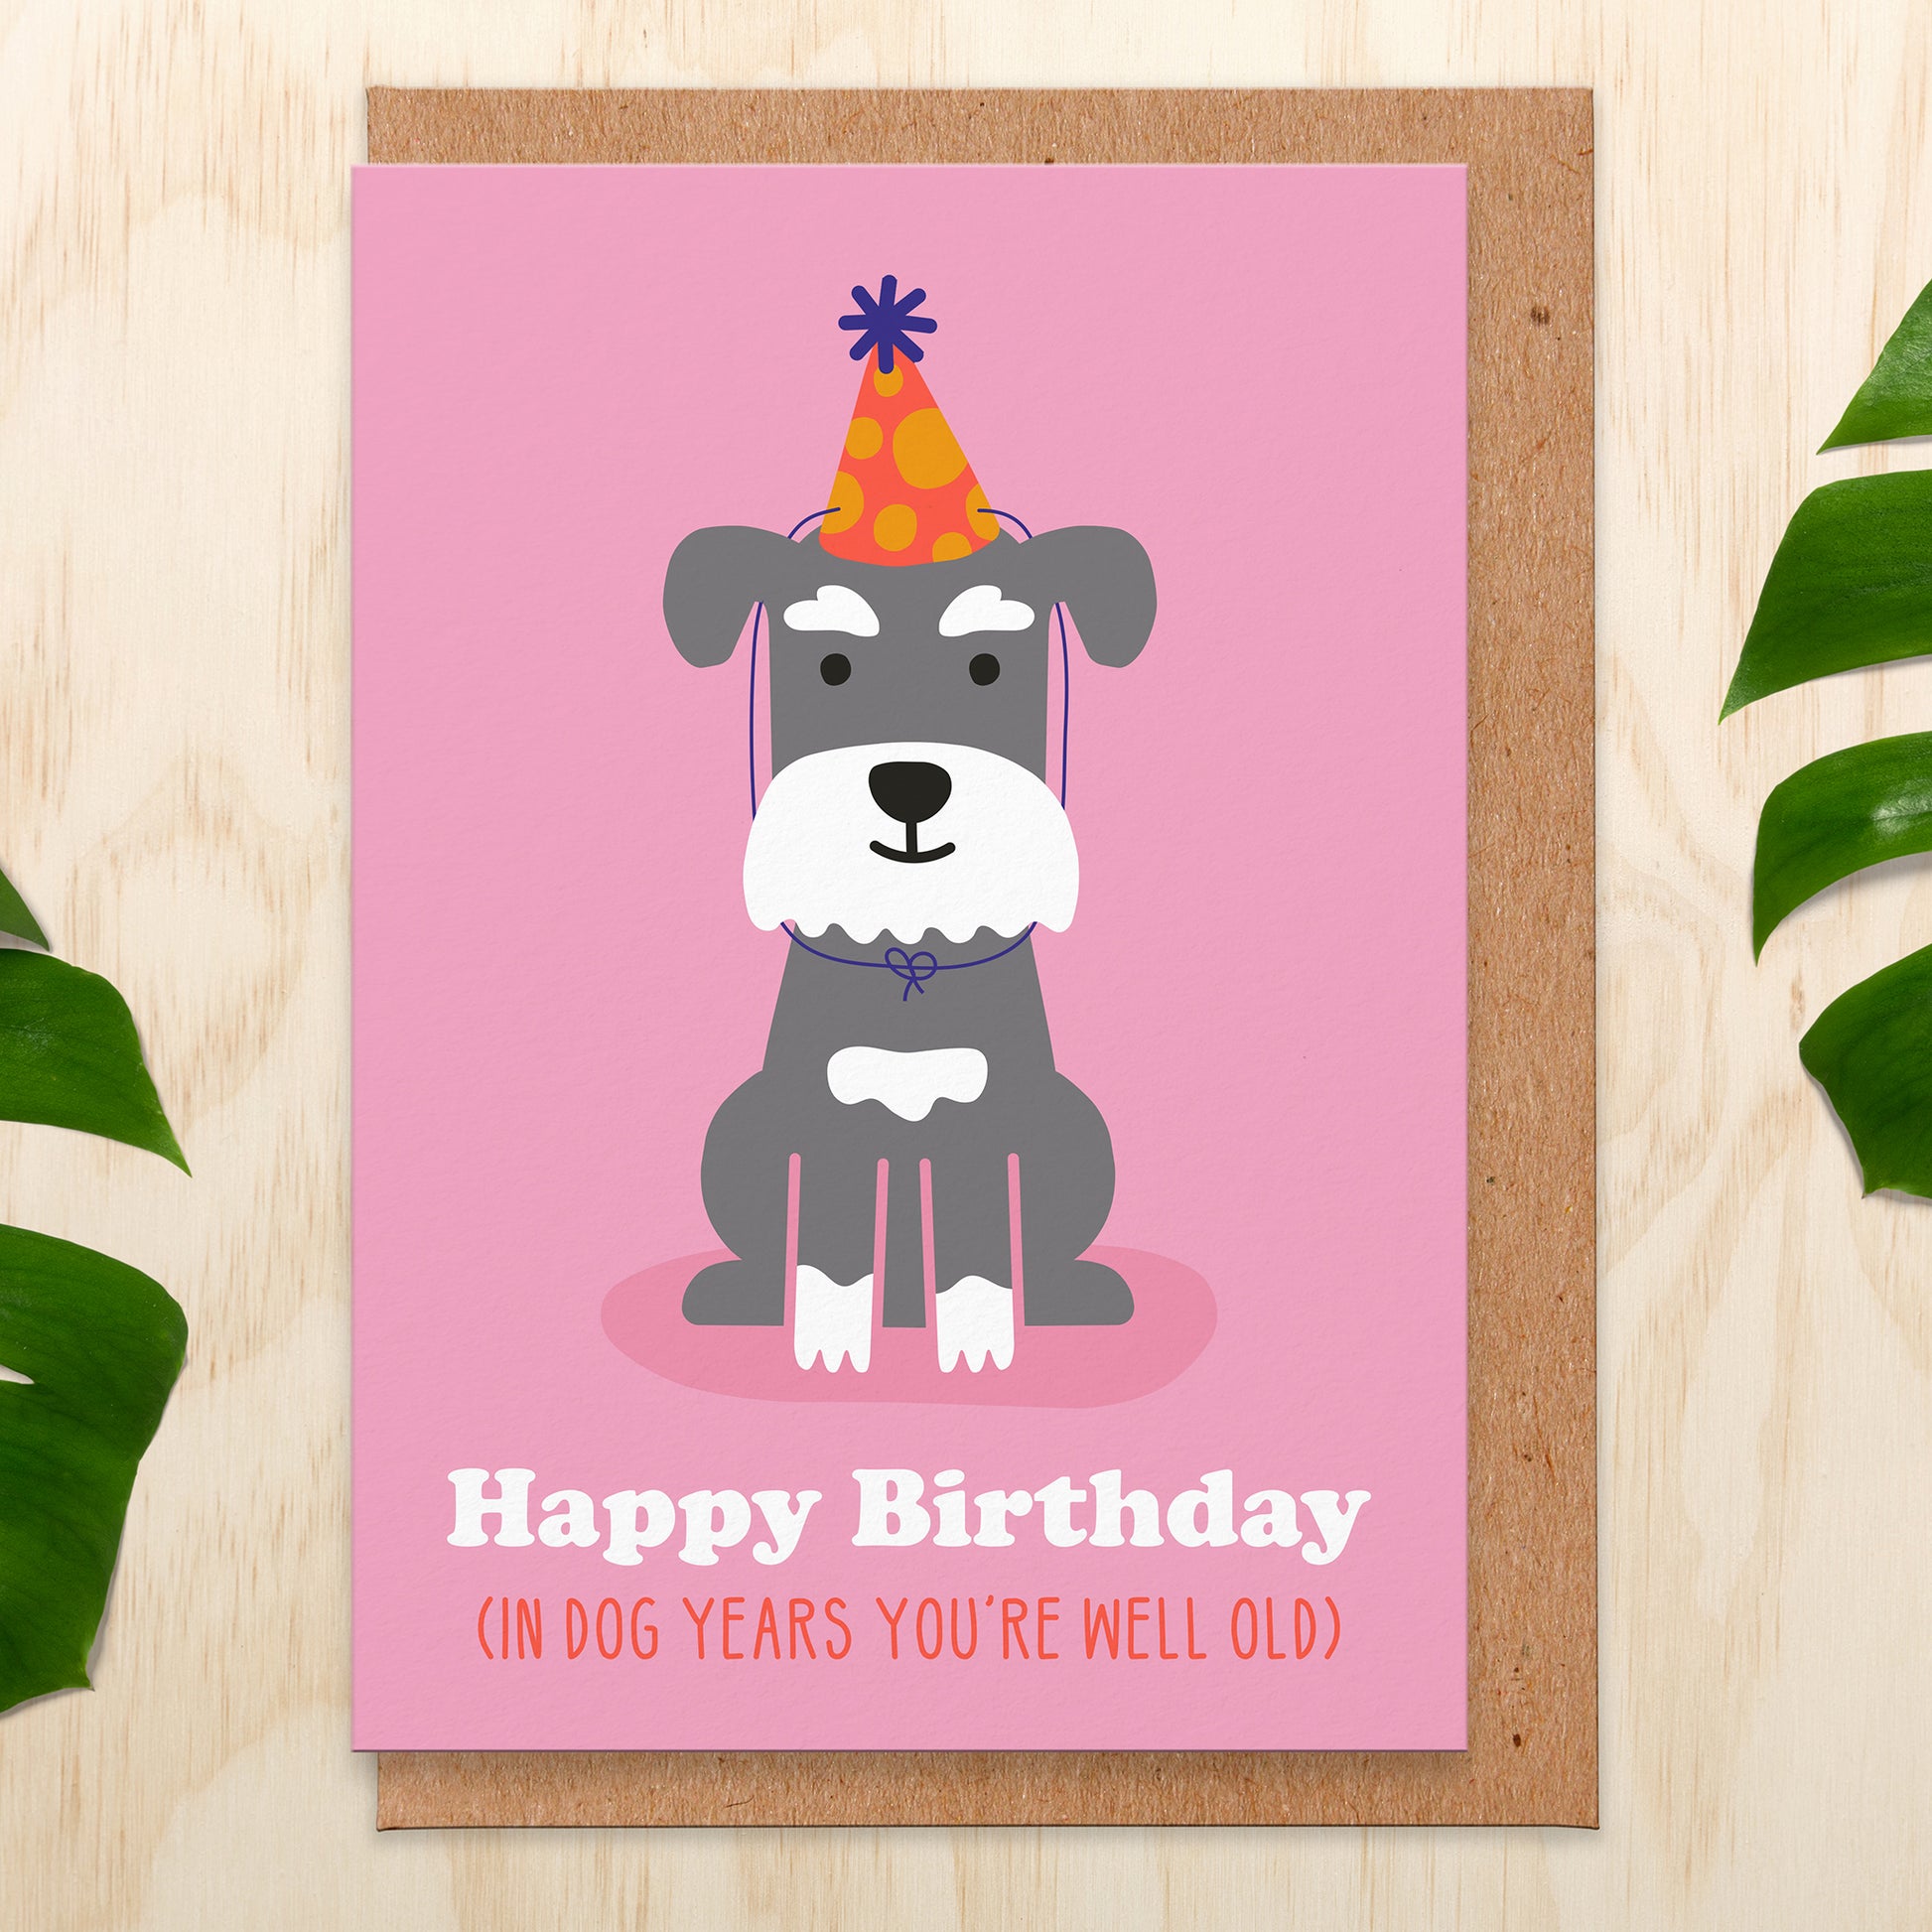 Pink greetings card with an illustration of a grey schnauzer wearing a party hat. Underneath it says happy birthday in dog years you're well old!